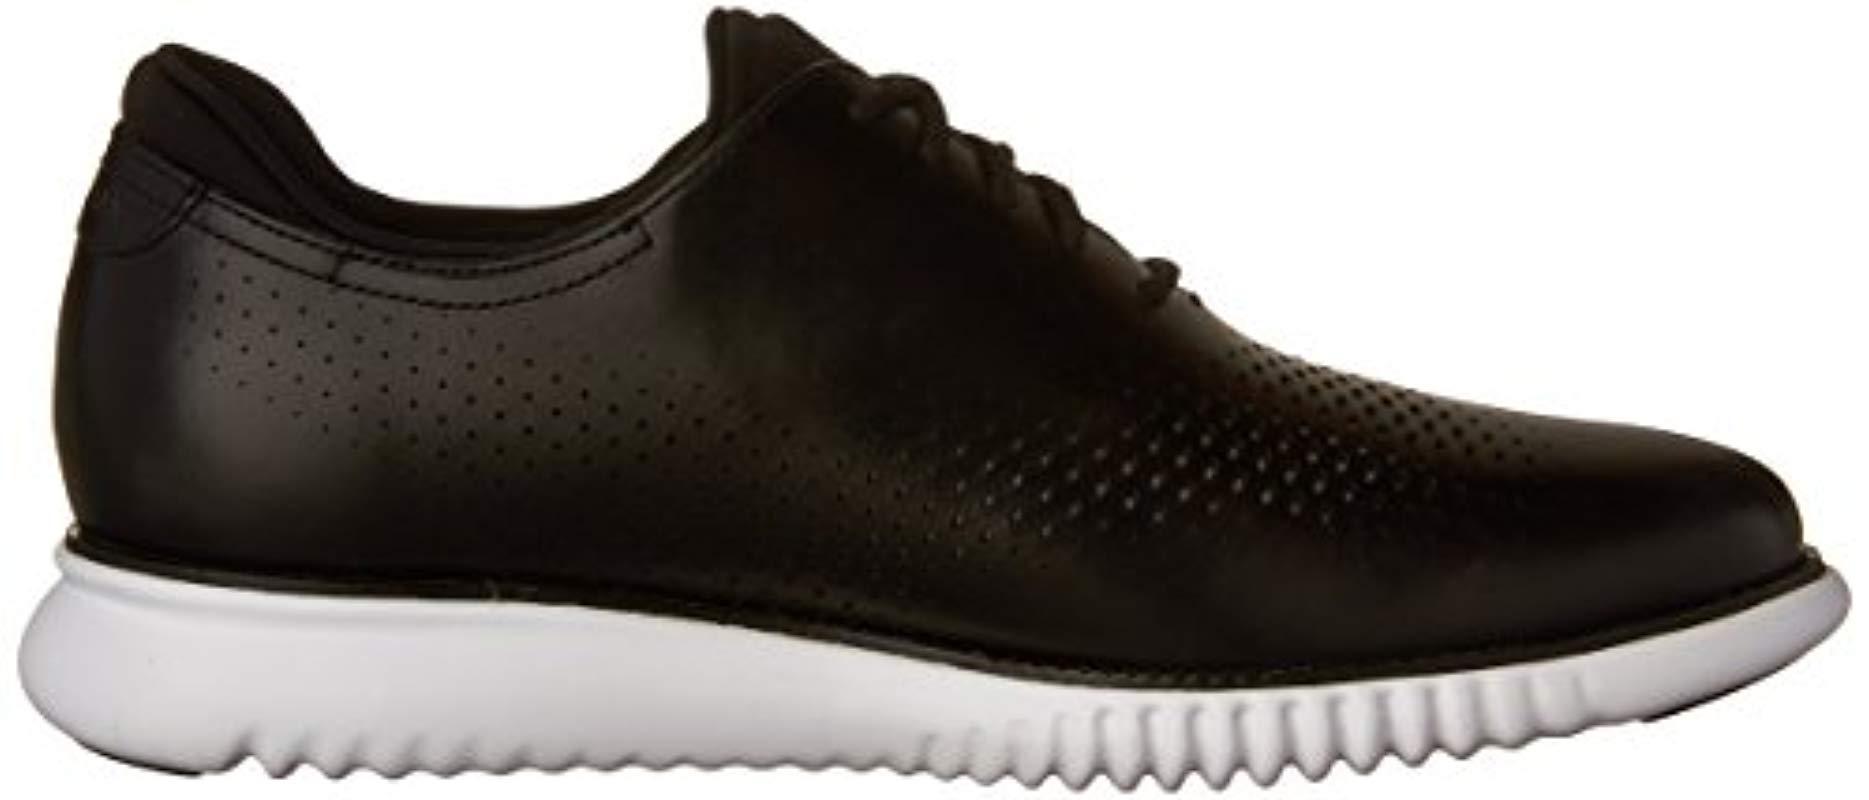 Cole Haan 2.zerogrand Laser Wing Oxford in Black for Men - Lyst